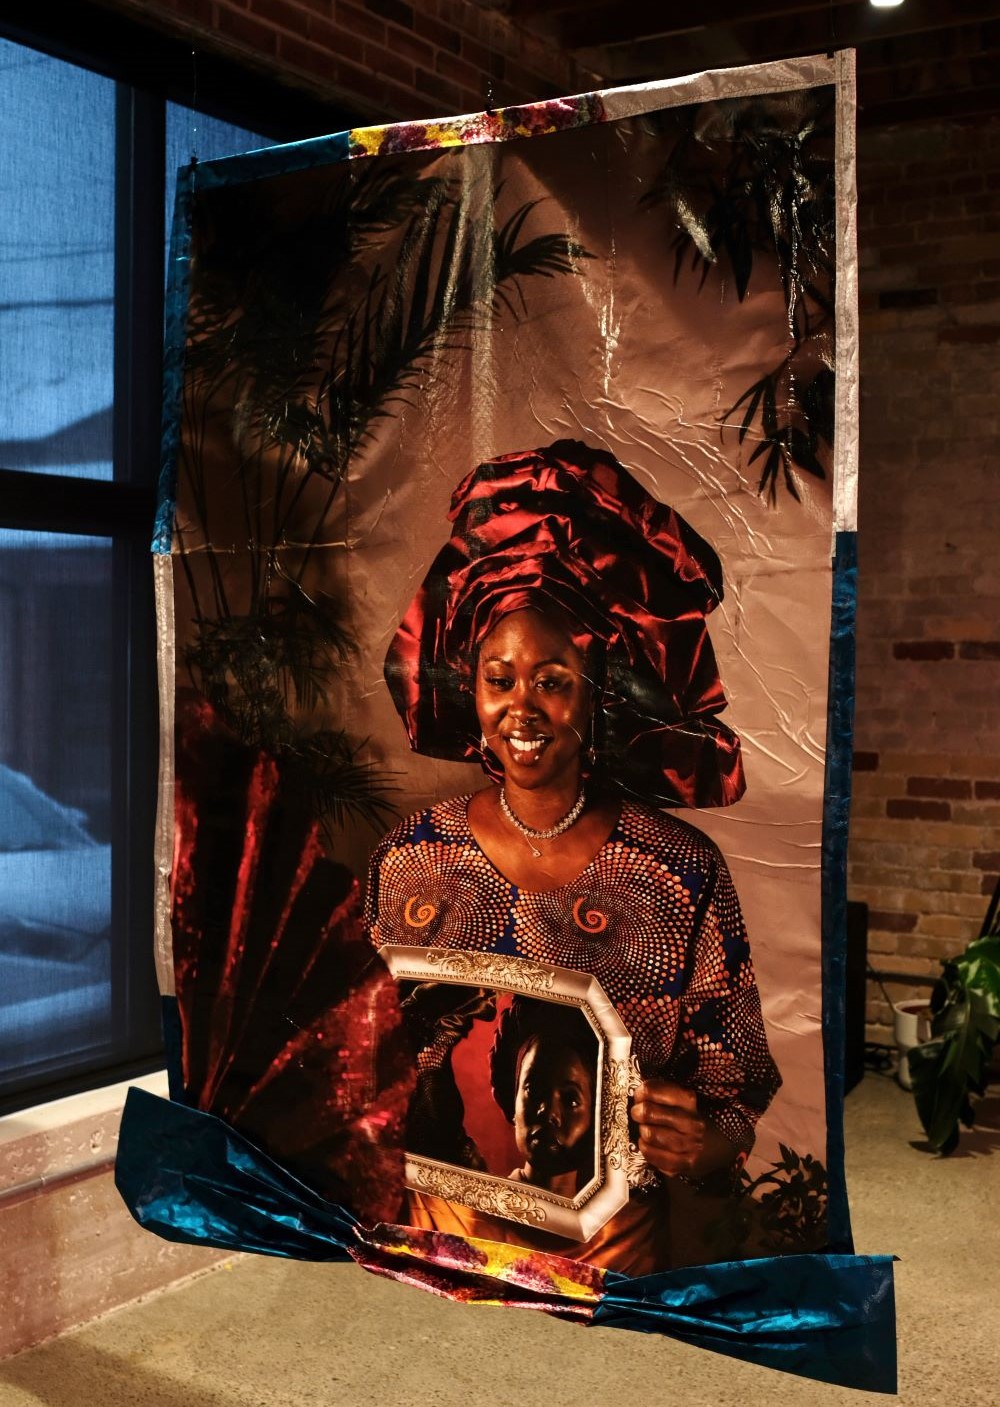 Cut from the Same Cloth: The HomeCourt Artist Residency Presents Destinie Adelakun’s Solo Exhibition